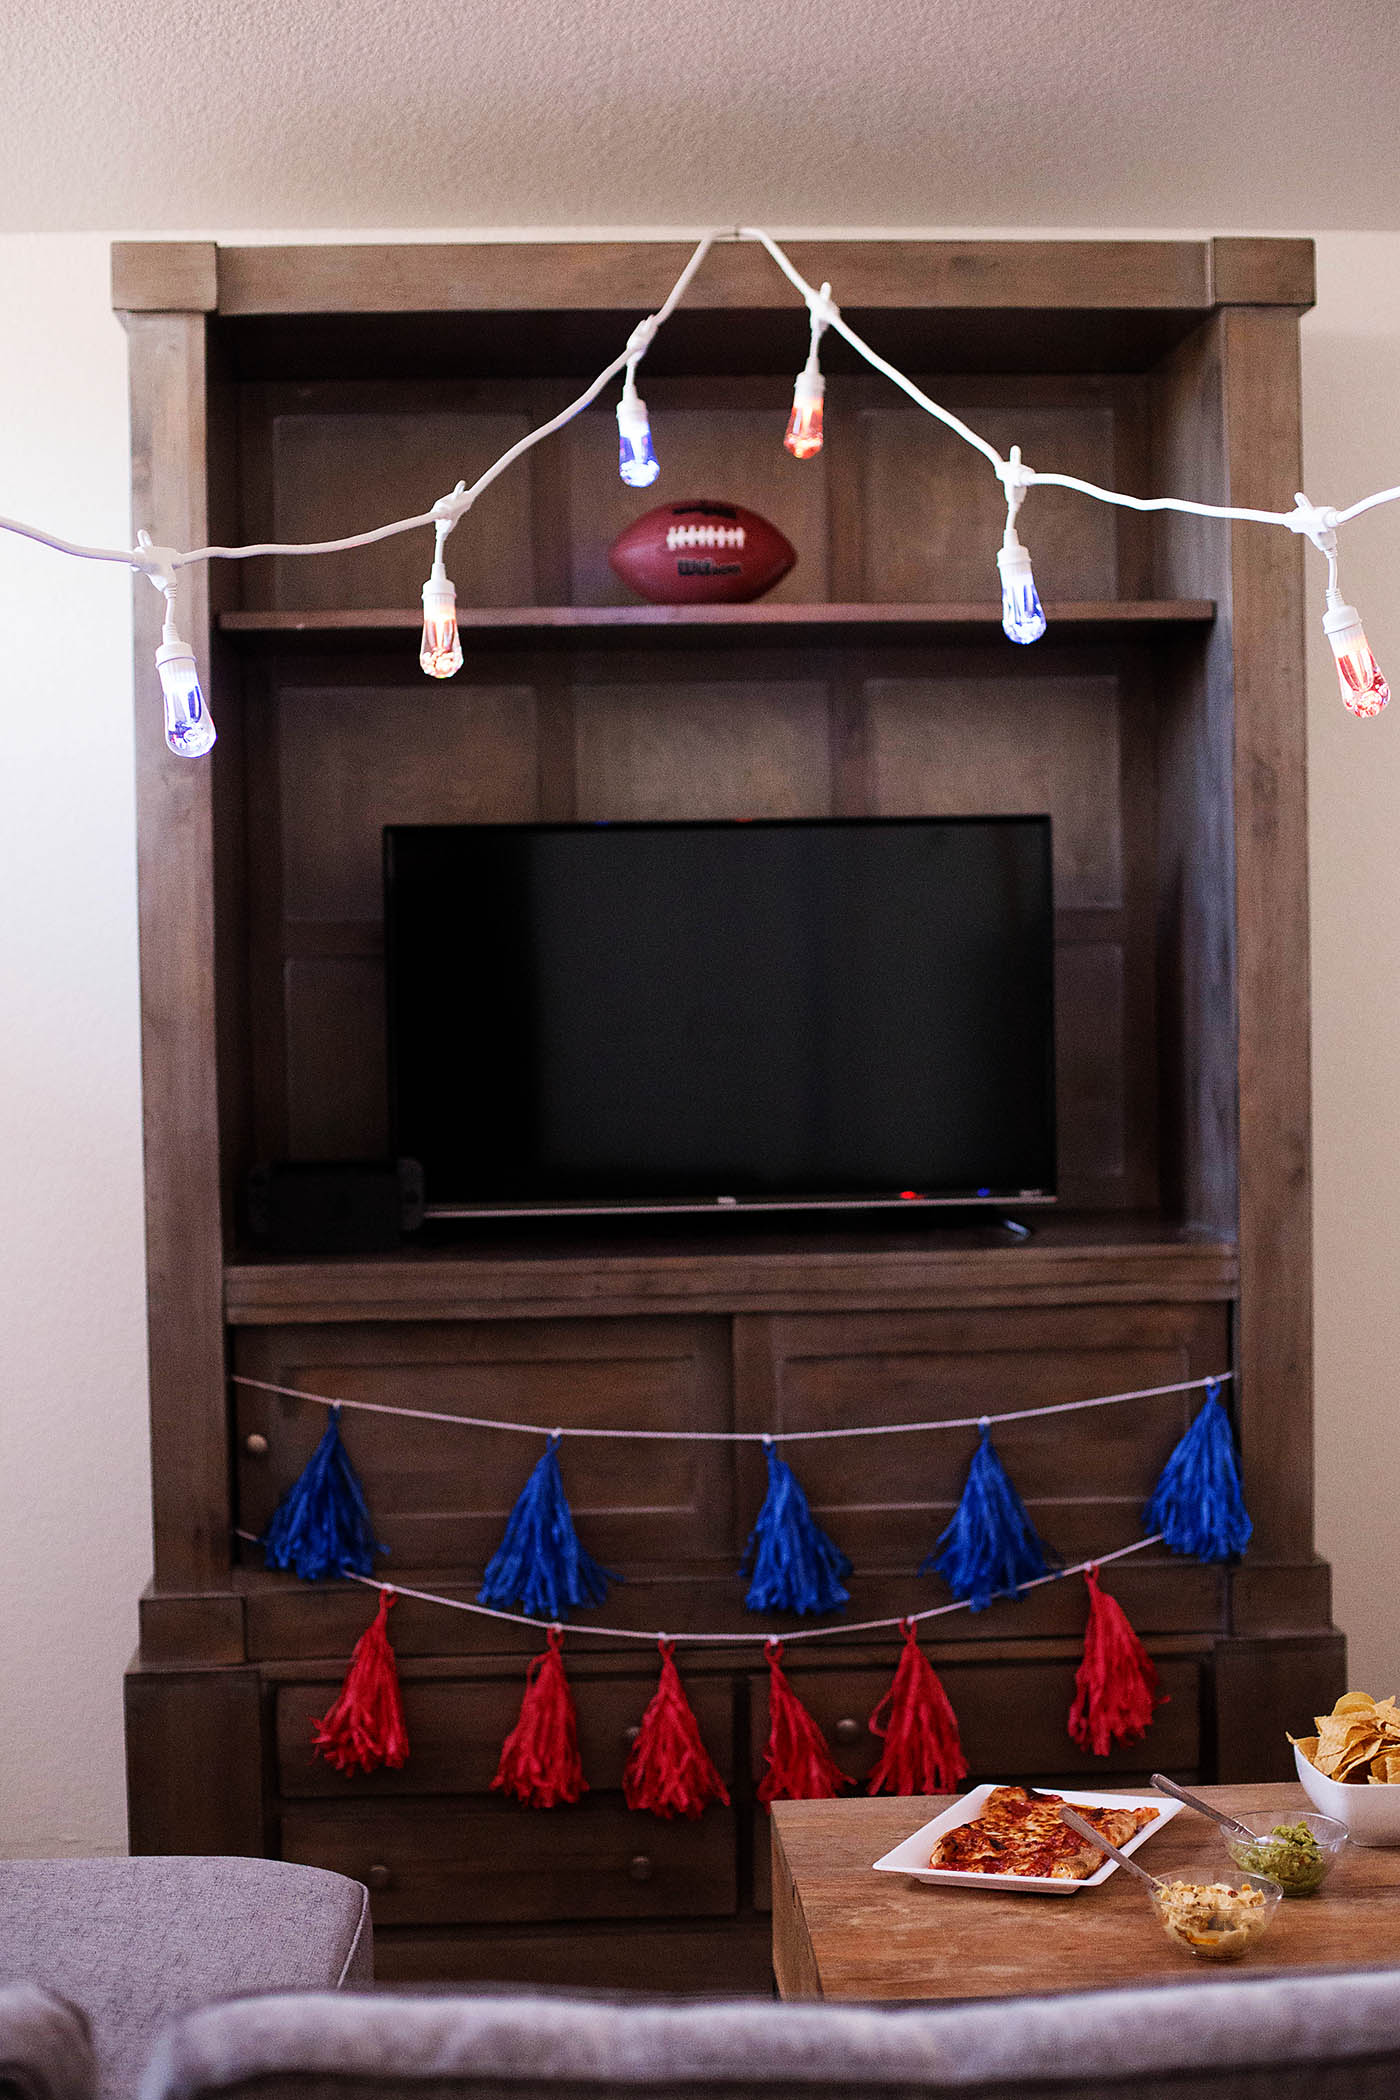 Homegating (a tailgating party at home) made easy with lights that change to your team’s colors and simple food favorites!